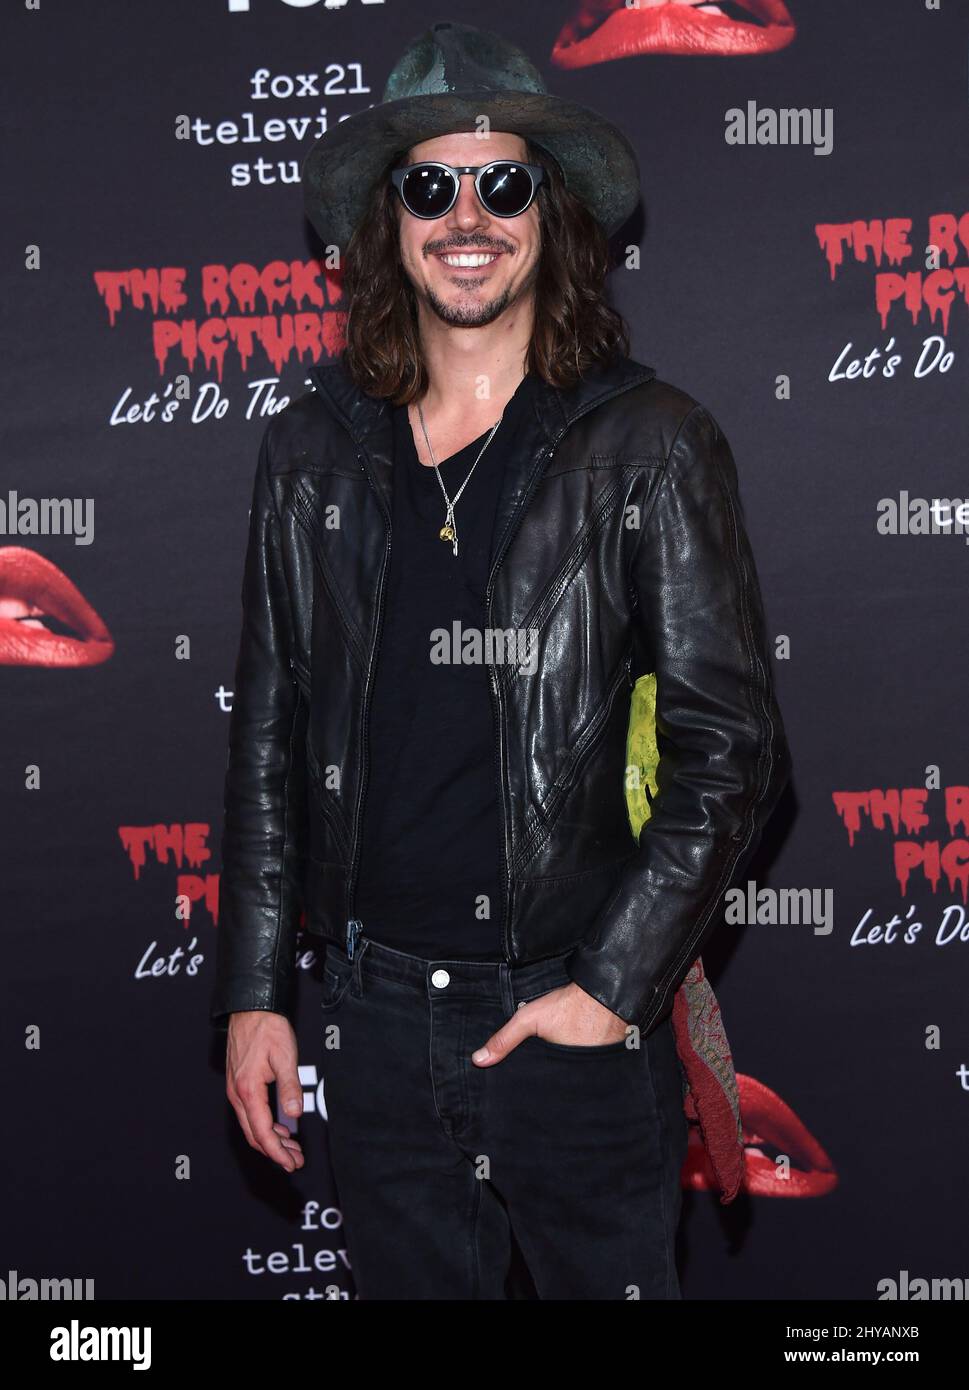 Cisco Adler attending the Rocky Horror Picture Show: Let's Do The Time Warp Again Premiere held at The Roxy, in Los Angeles, California. Stock Photo